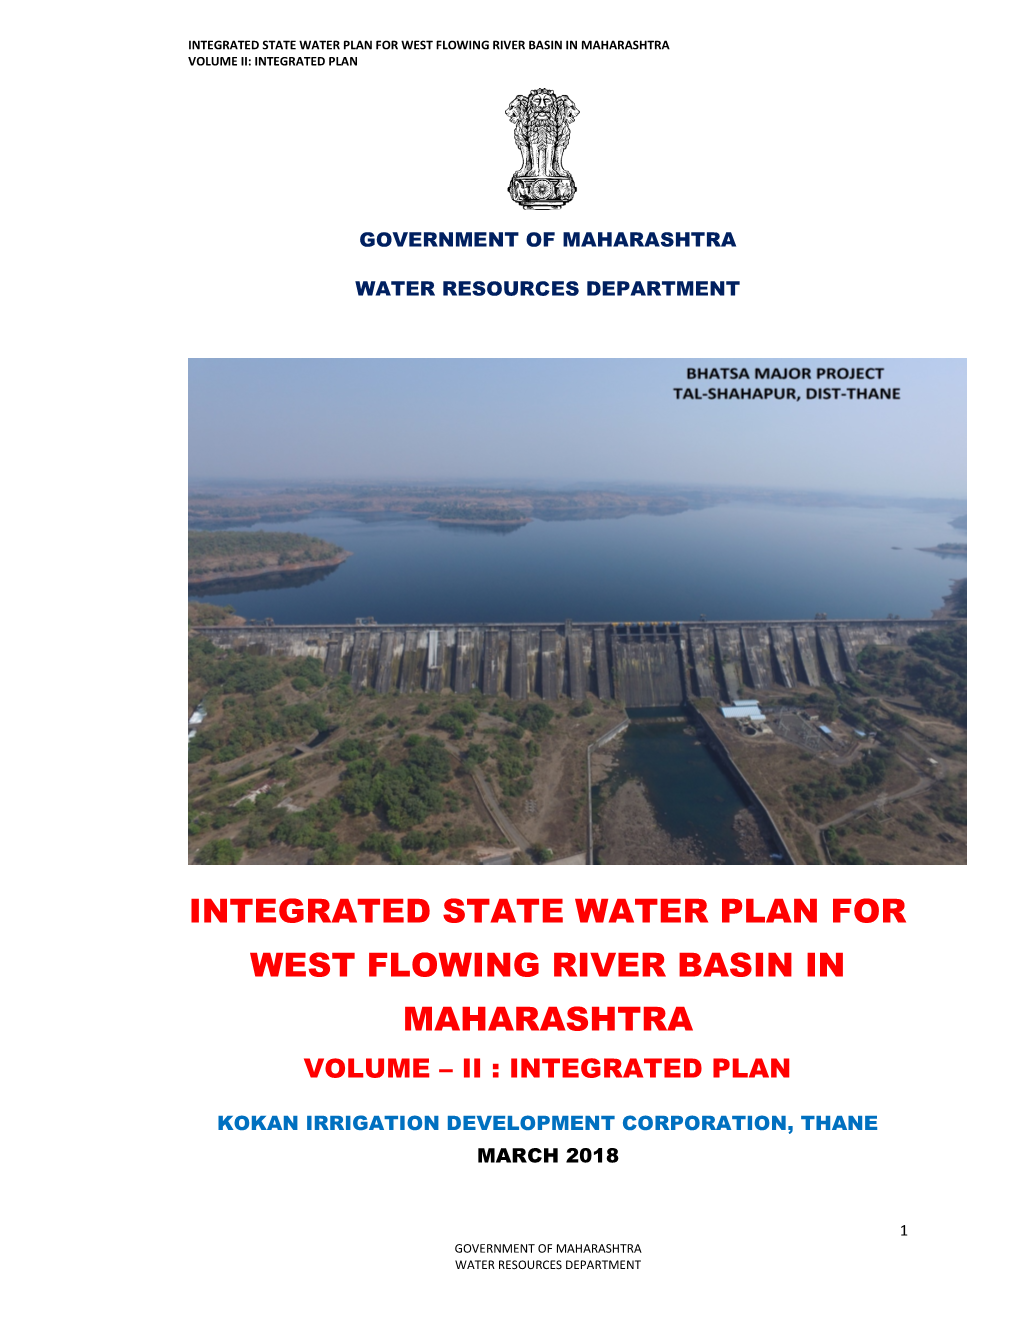 Integrated State Water Plan for West Flowing River Basin in Maharashtra Volume Ii: Integrated Plan